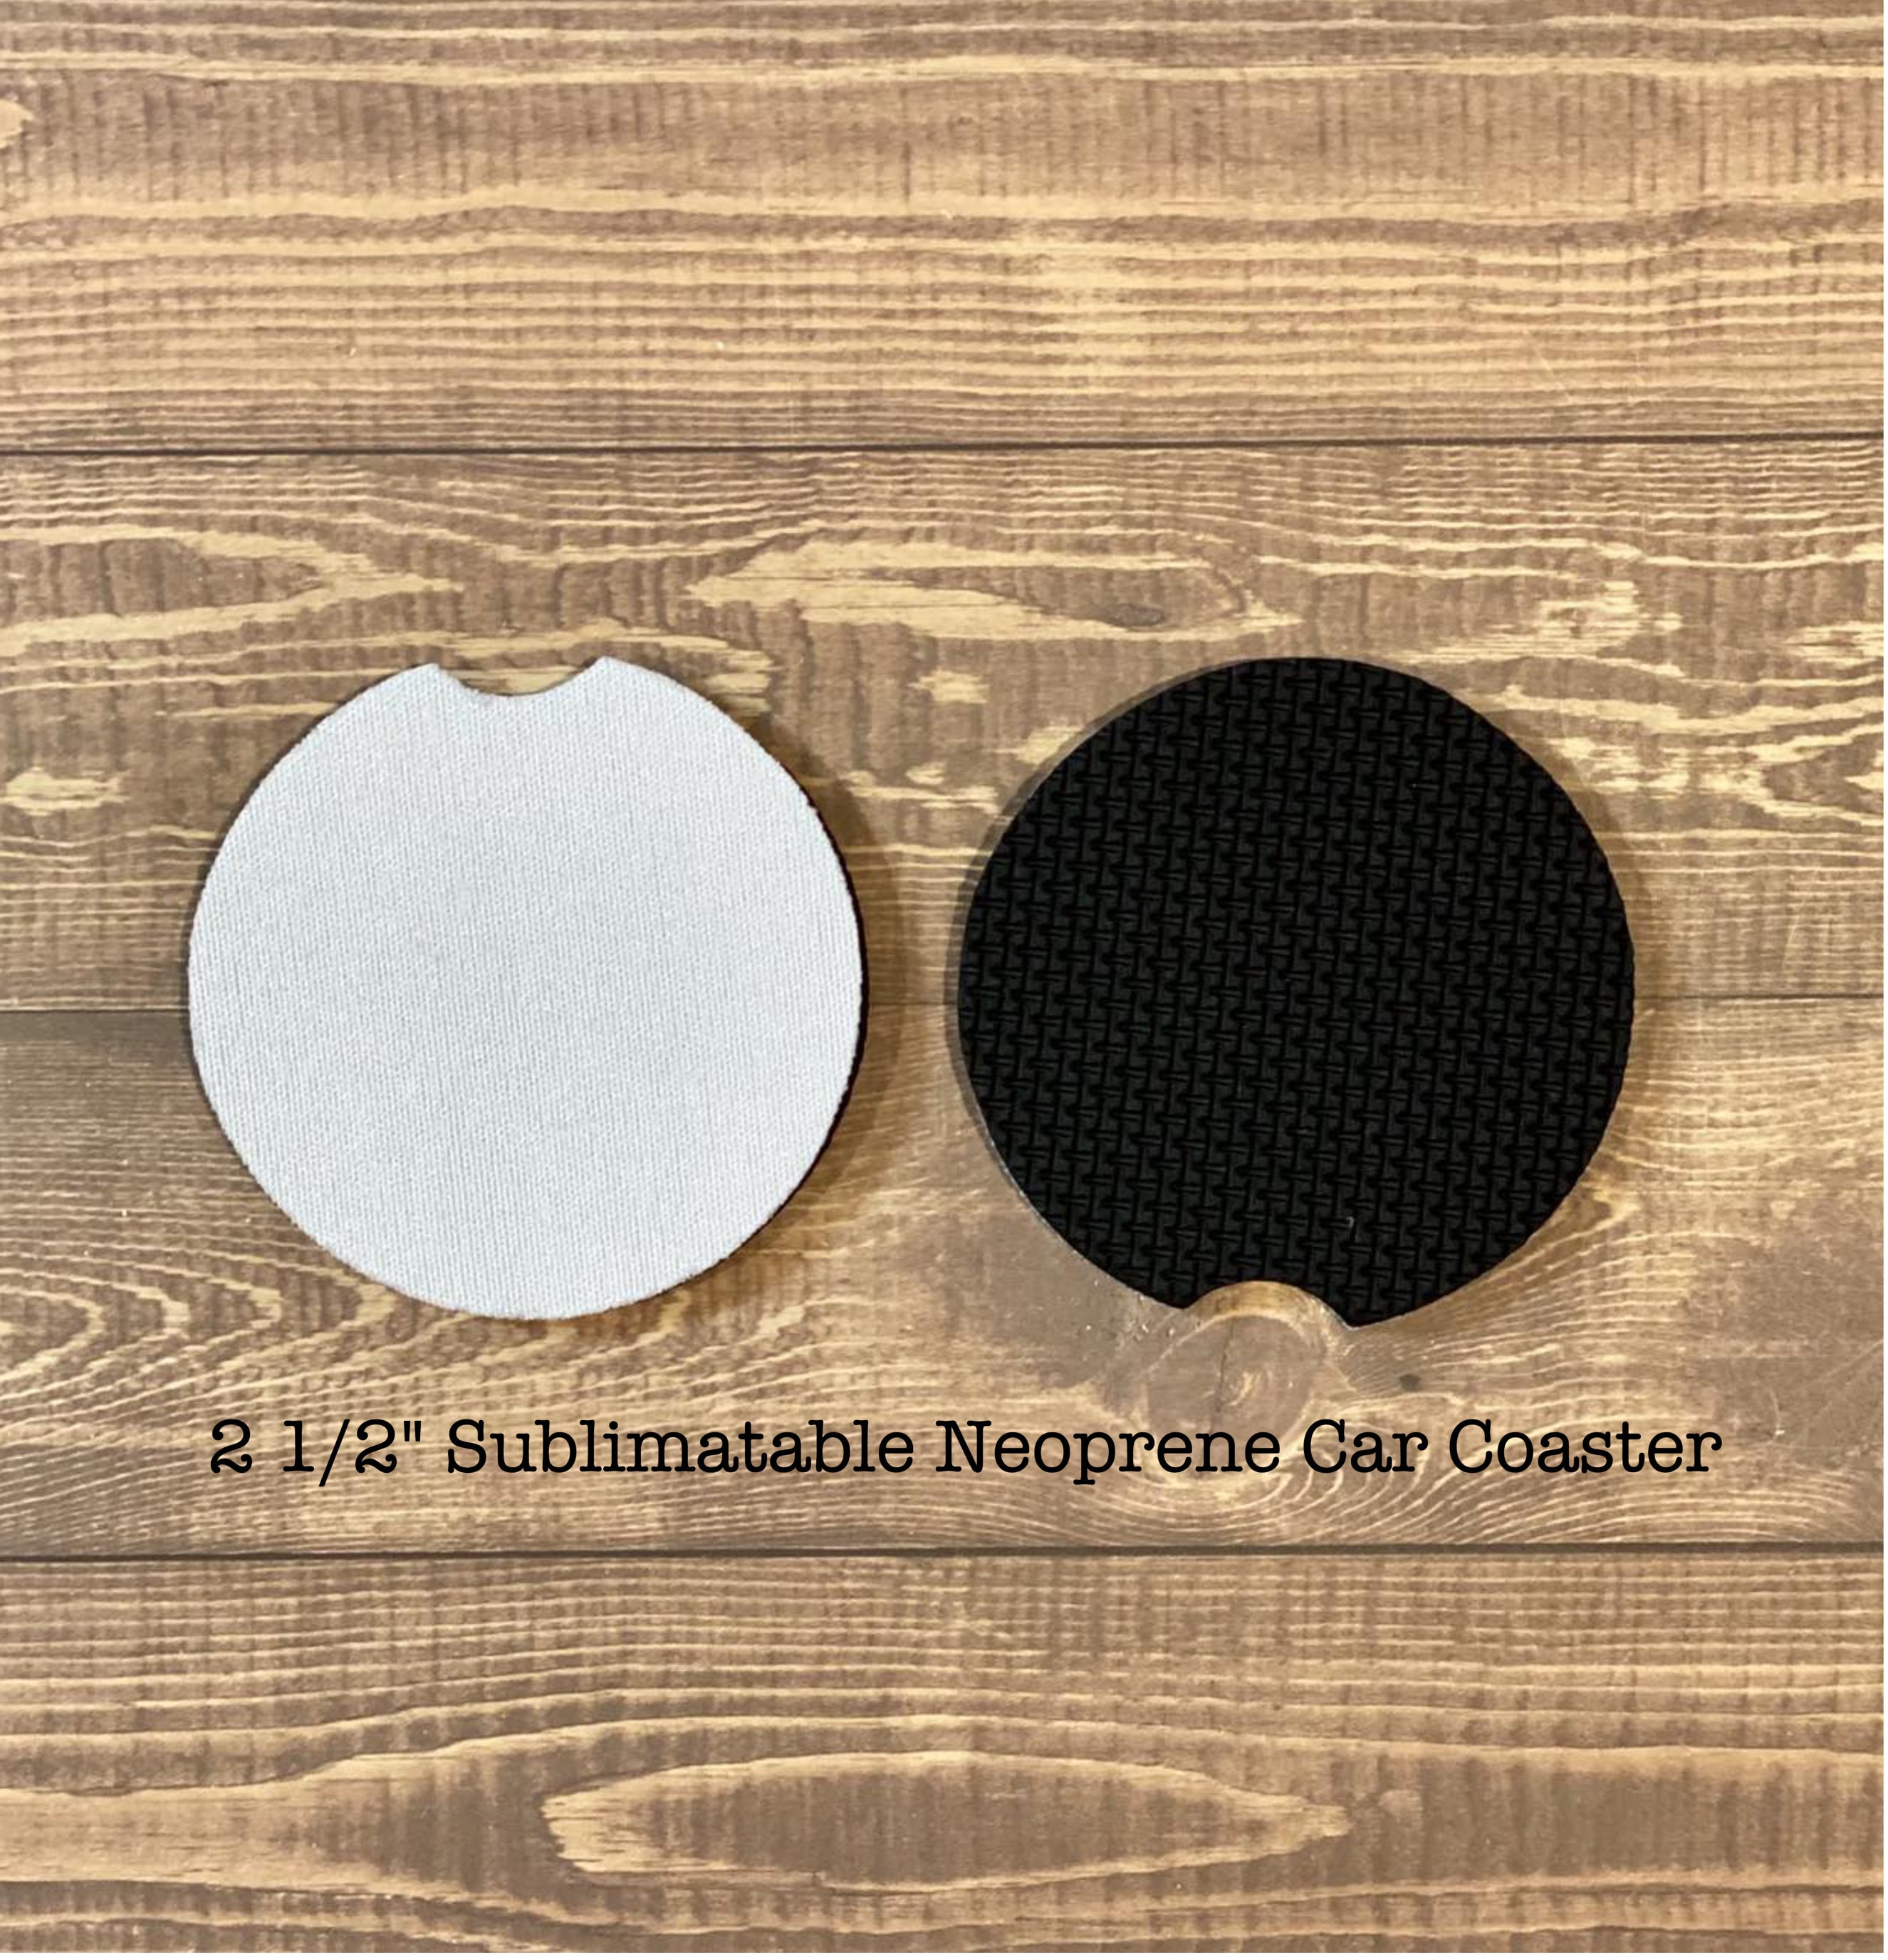 Sublimation Blank Car Coasters for Cup Holders, 6 Pack Neoprene Car Coaster  Blanks for Crafts, 2.56 Inches Round Decorate Your Own Coaster DIY Project